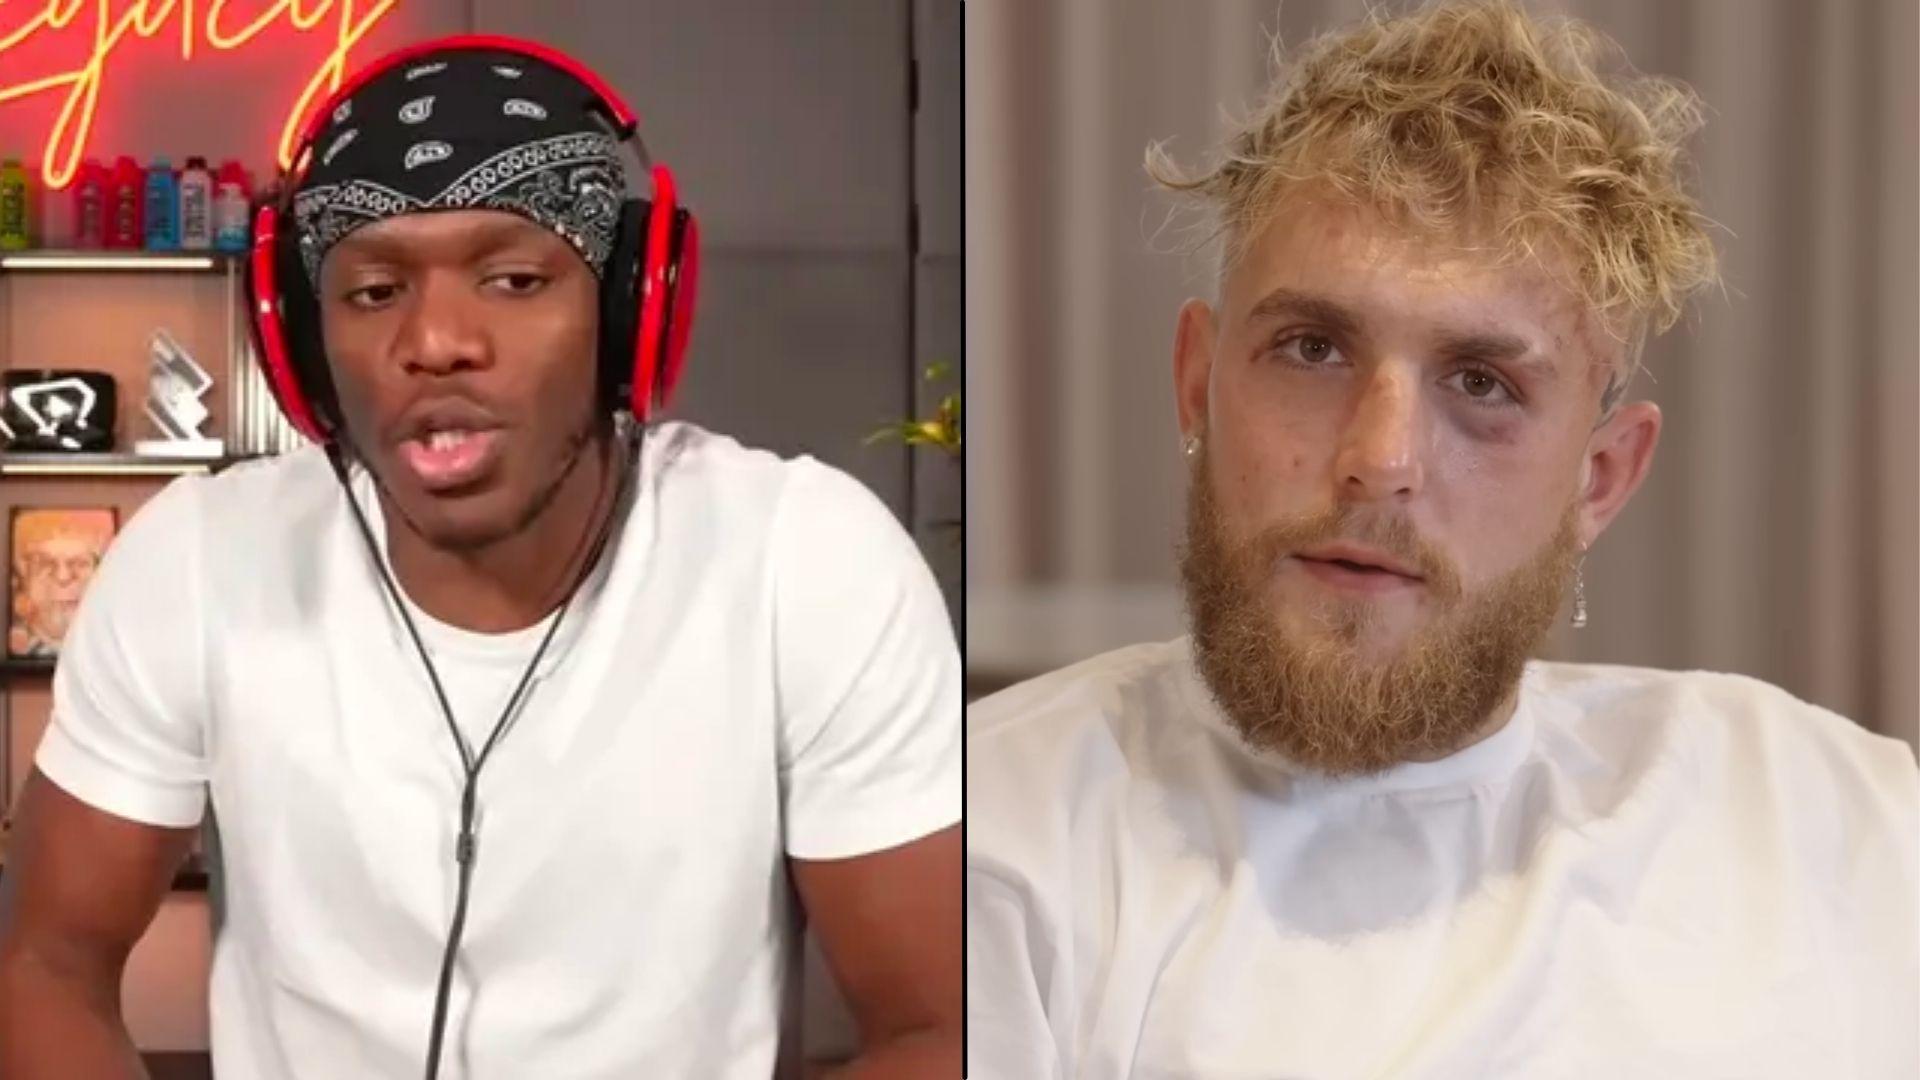 KSI and Jake Paul side by side looking at camera wearing white shirts